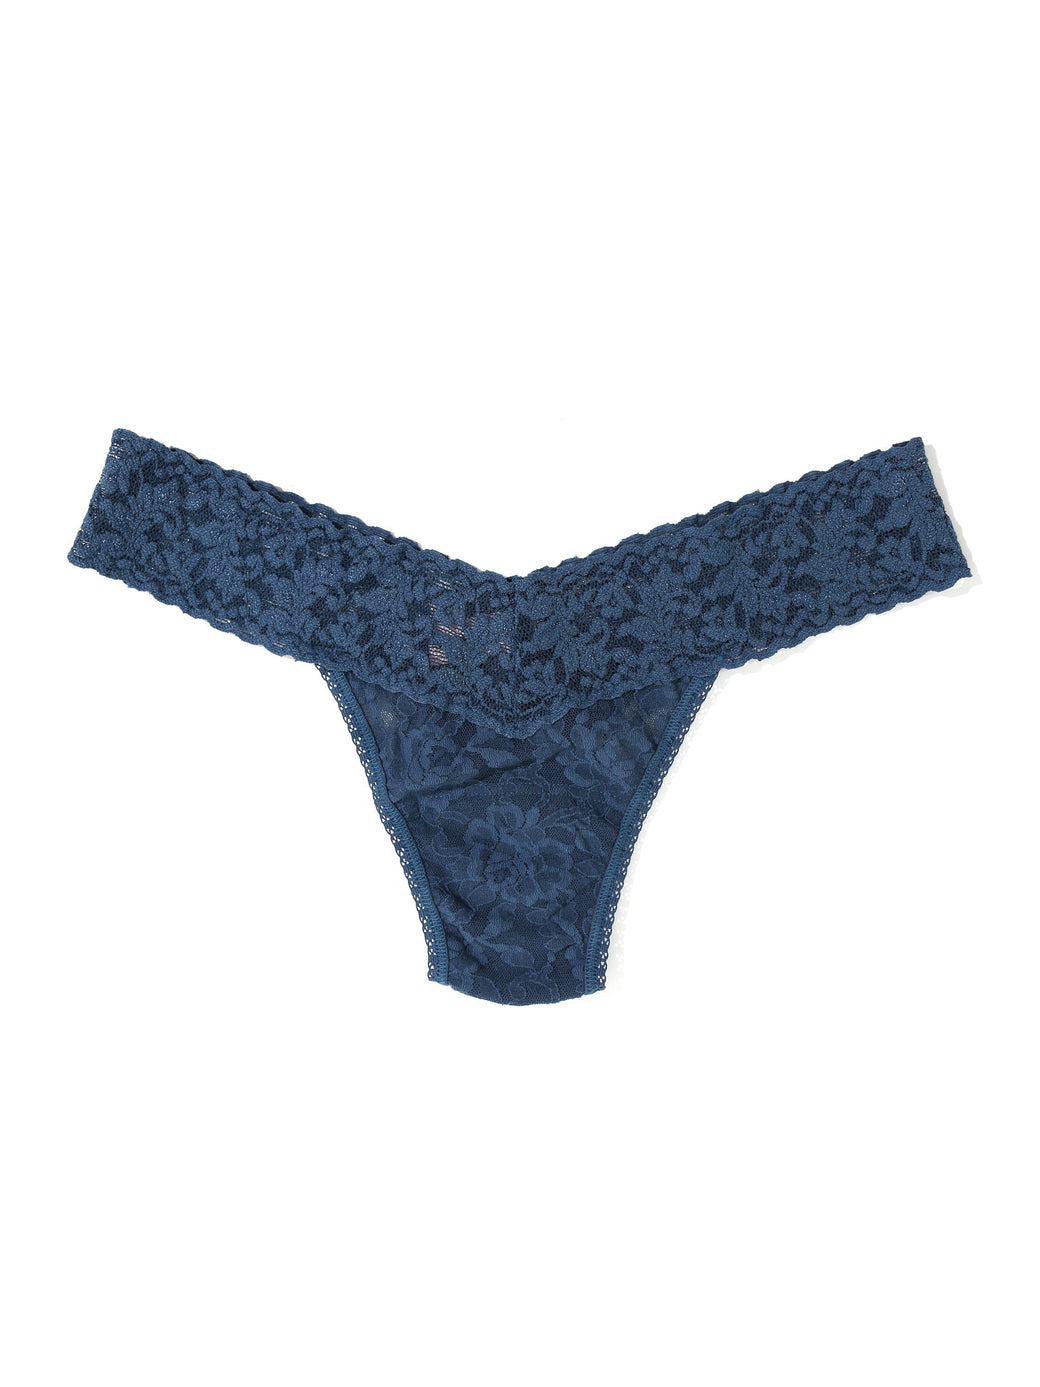 Hanky Panky High Rise G-string in Blue Solace